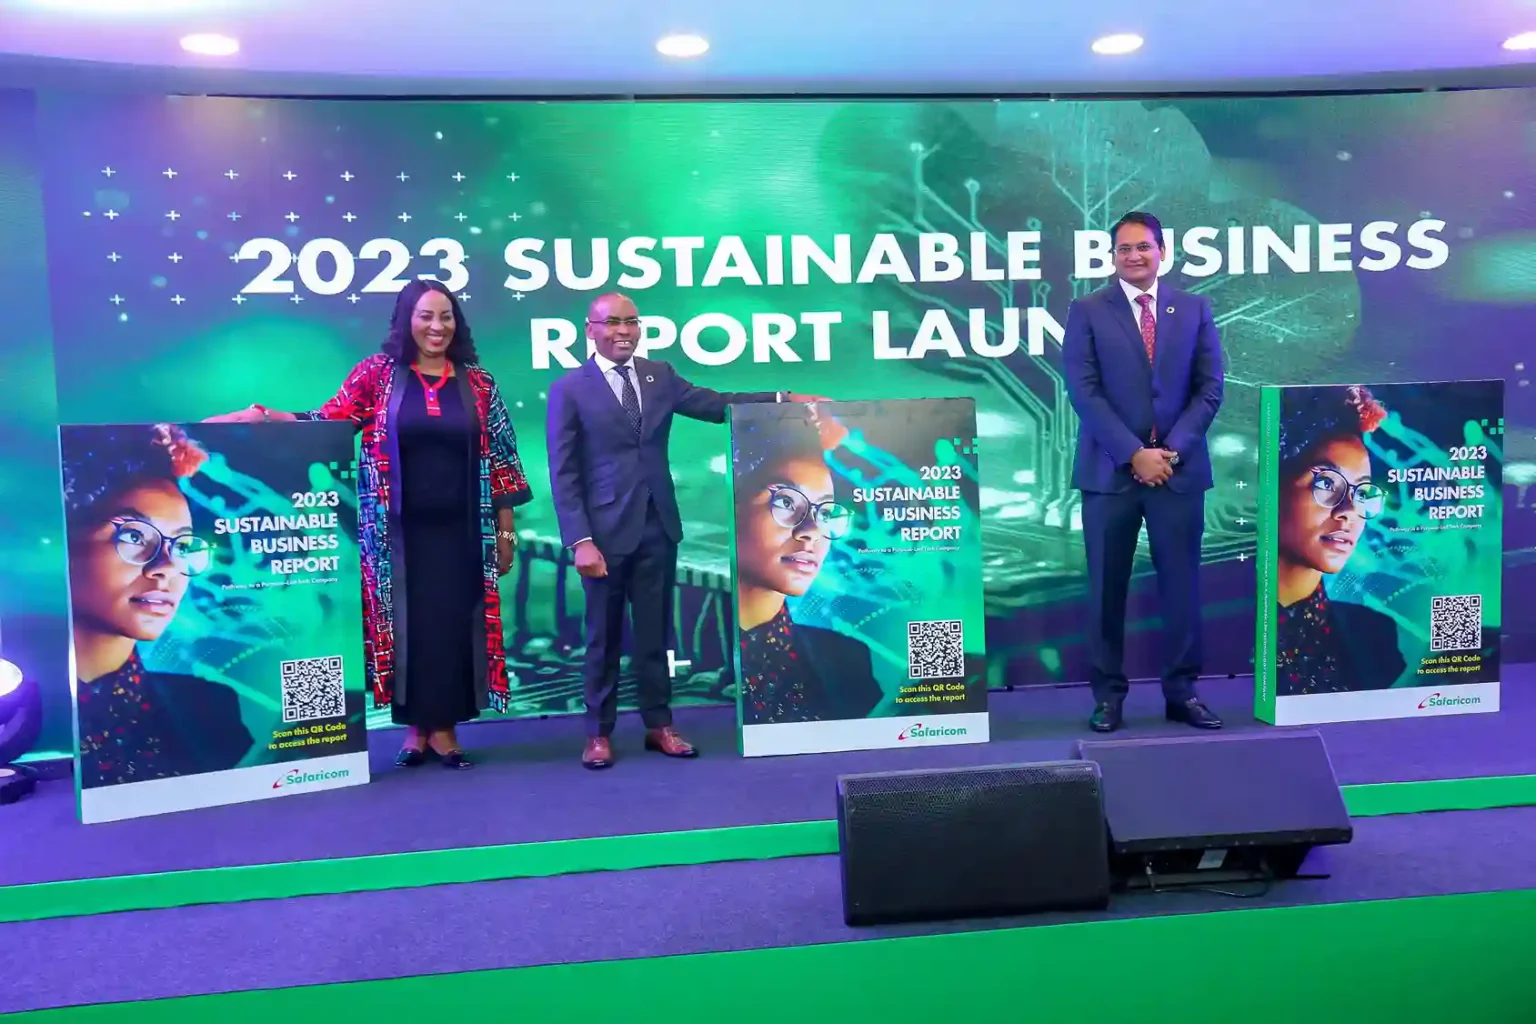 Safaricom PLC Chairman, Adil Khawaja (right), with Safaricom PLC CEO, Peter Ndegwa (centre) and Alliance for Science- Executive Director, Dr. Sheila Ochugboju. This was during the launch of the 2023 Safaricom Business Report held at Michael Joseph Center Nairobi.